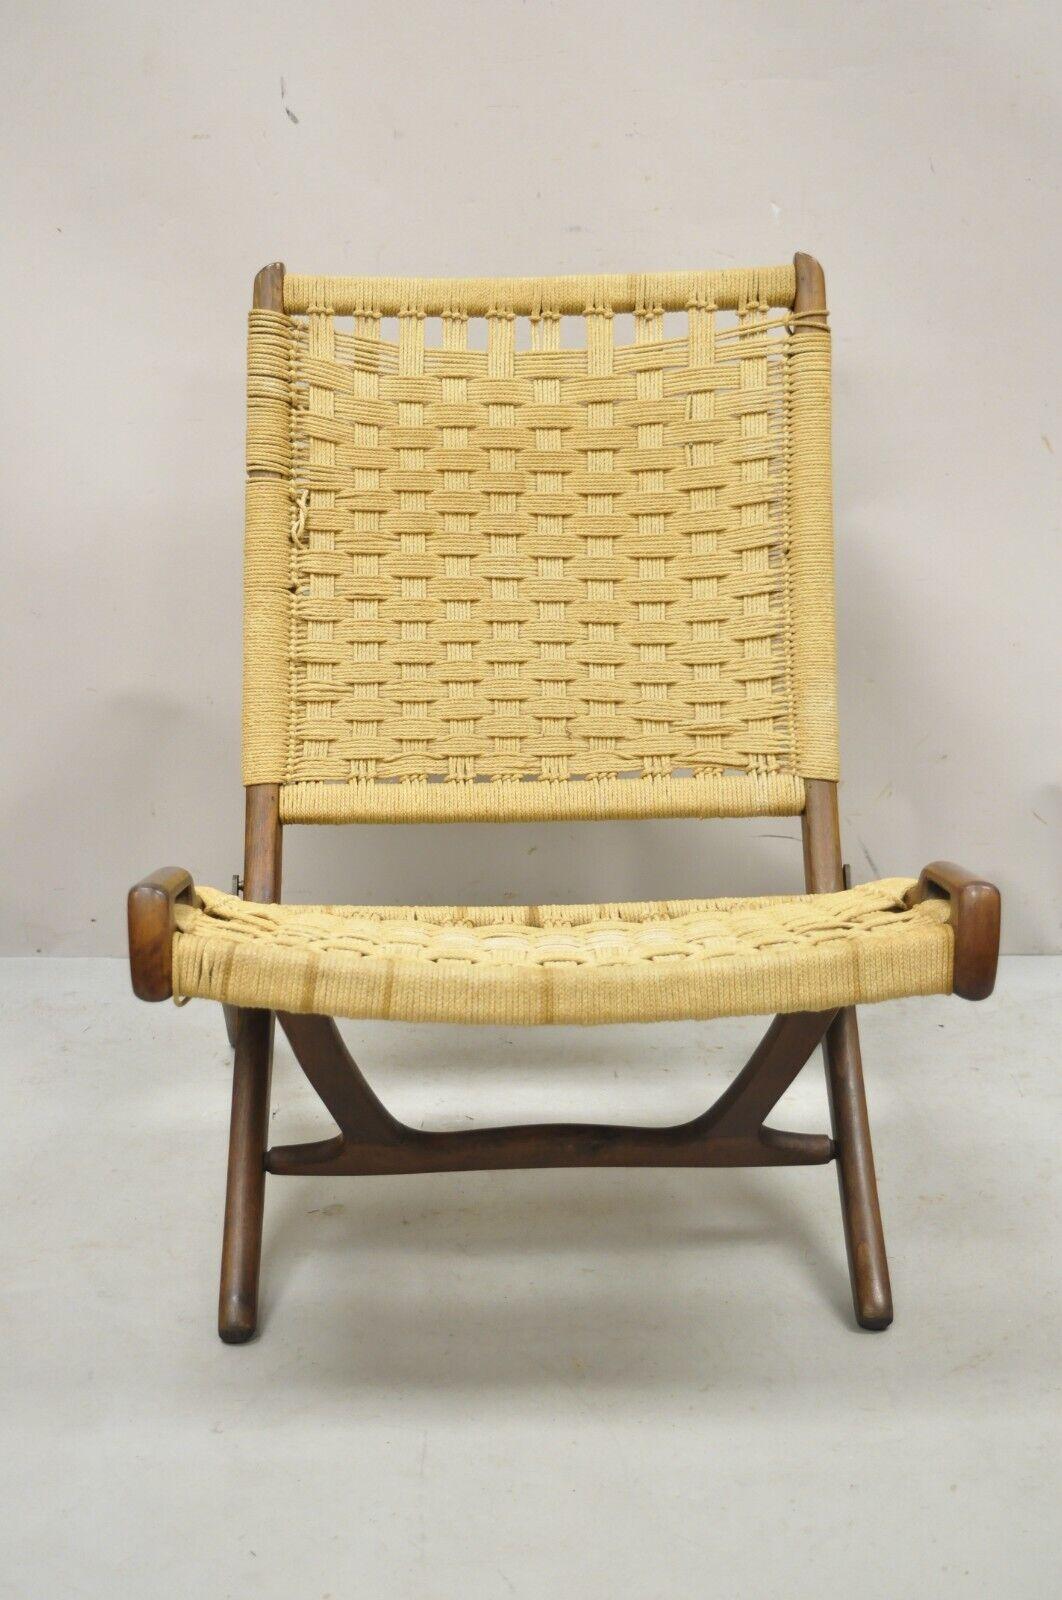 Hans Wegner Style folding rope chair Mid-Century Modern Lounge chair. Item features folding frame, woven rope cord back and seat, very nice vintage item, clean modernist lines, great style and form. Circa mid 20th century.
Measurements: 
Open: